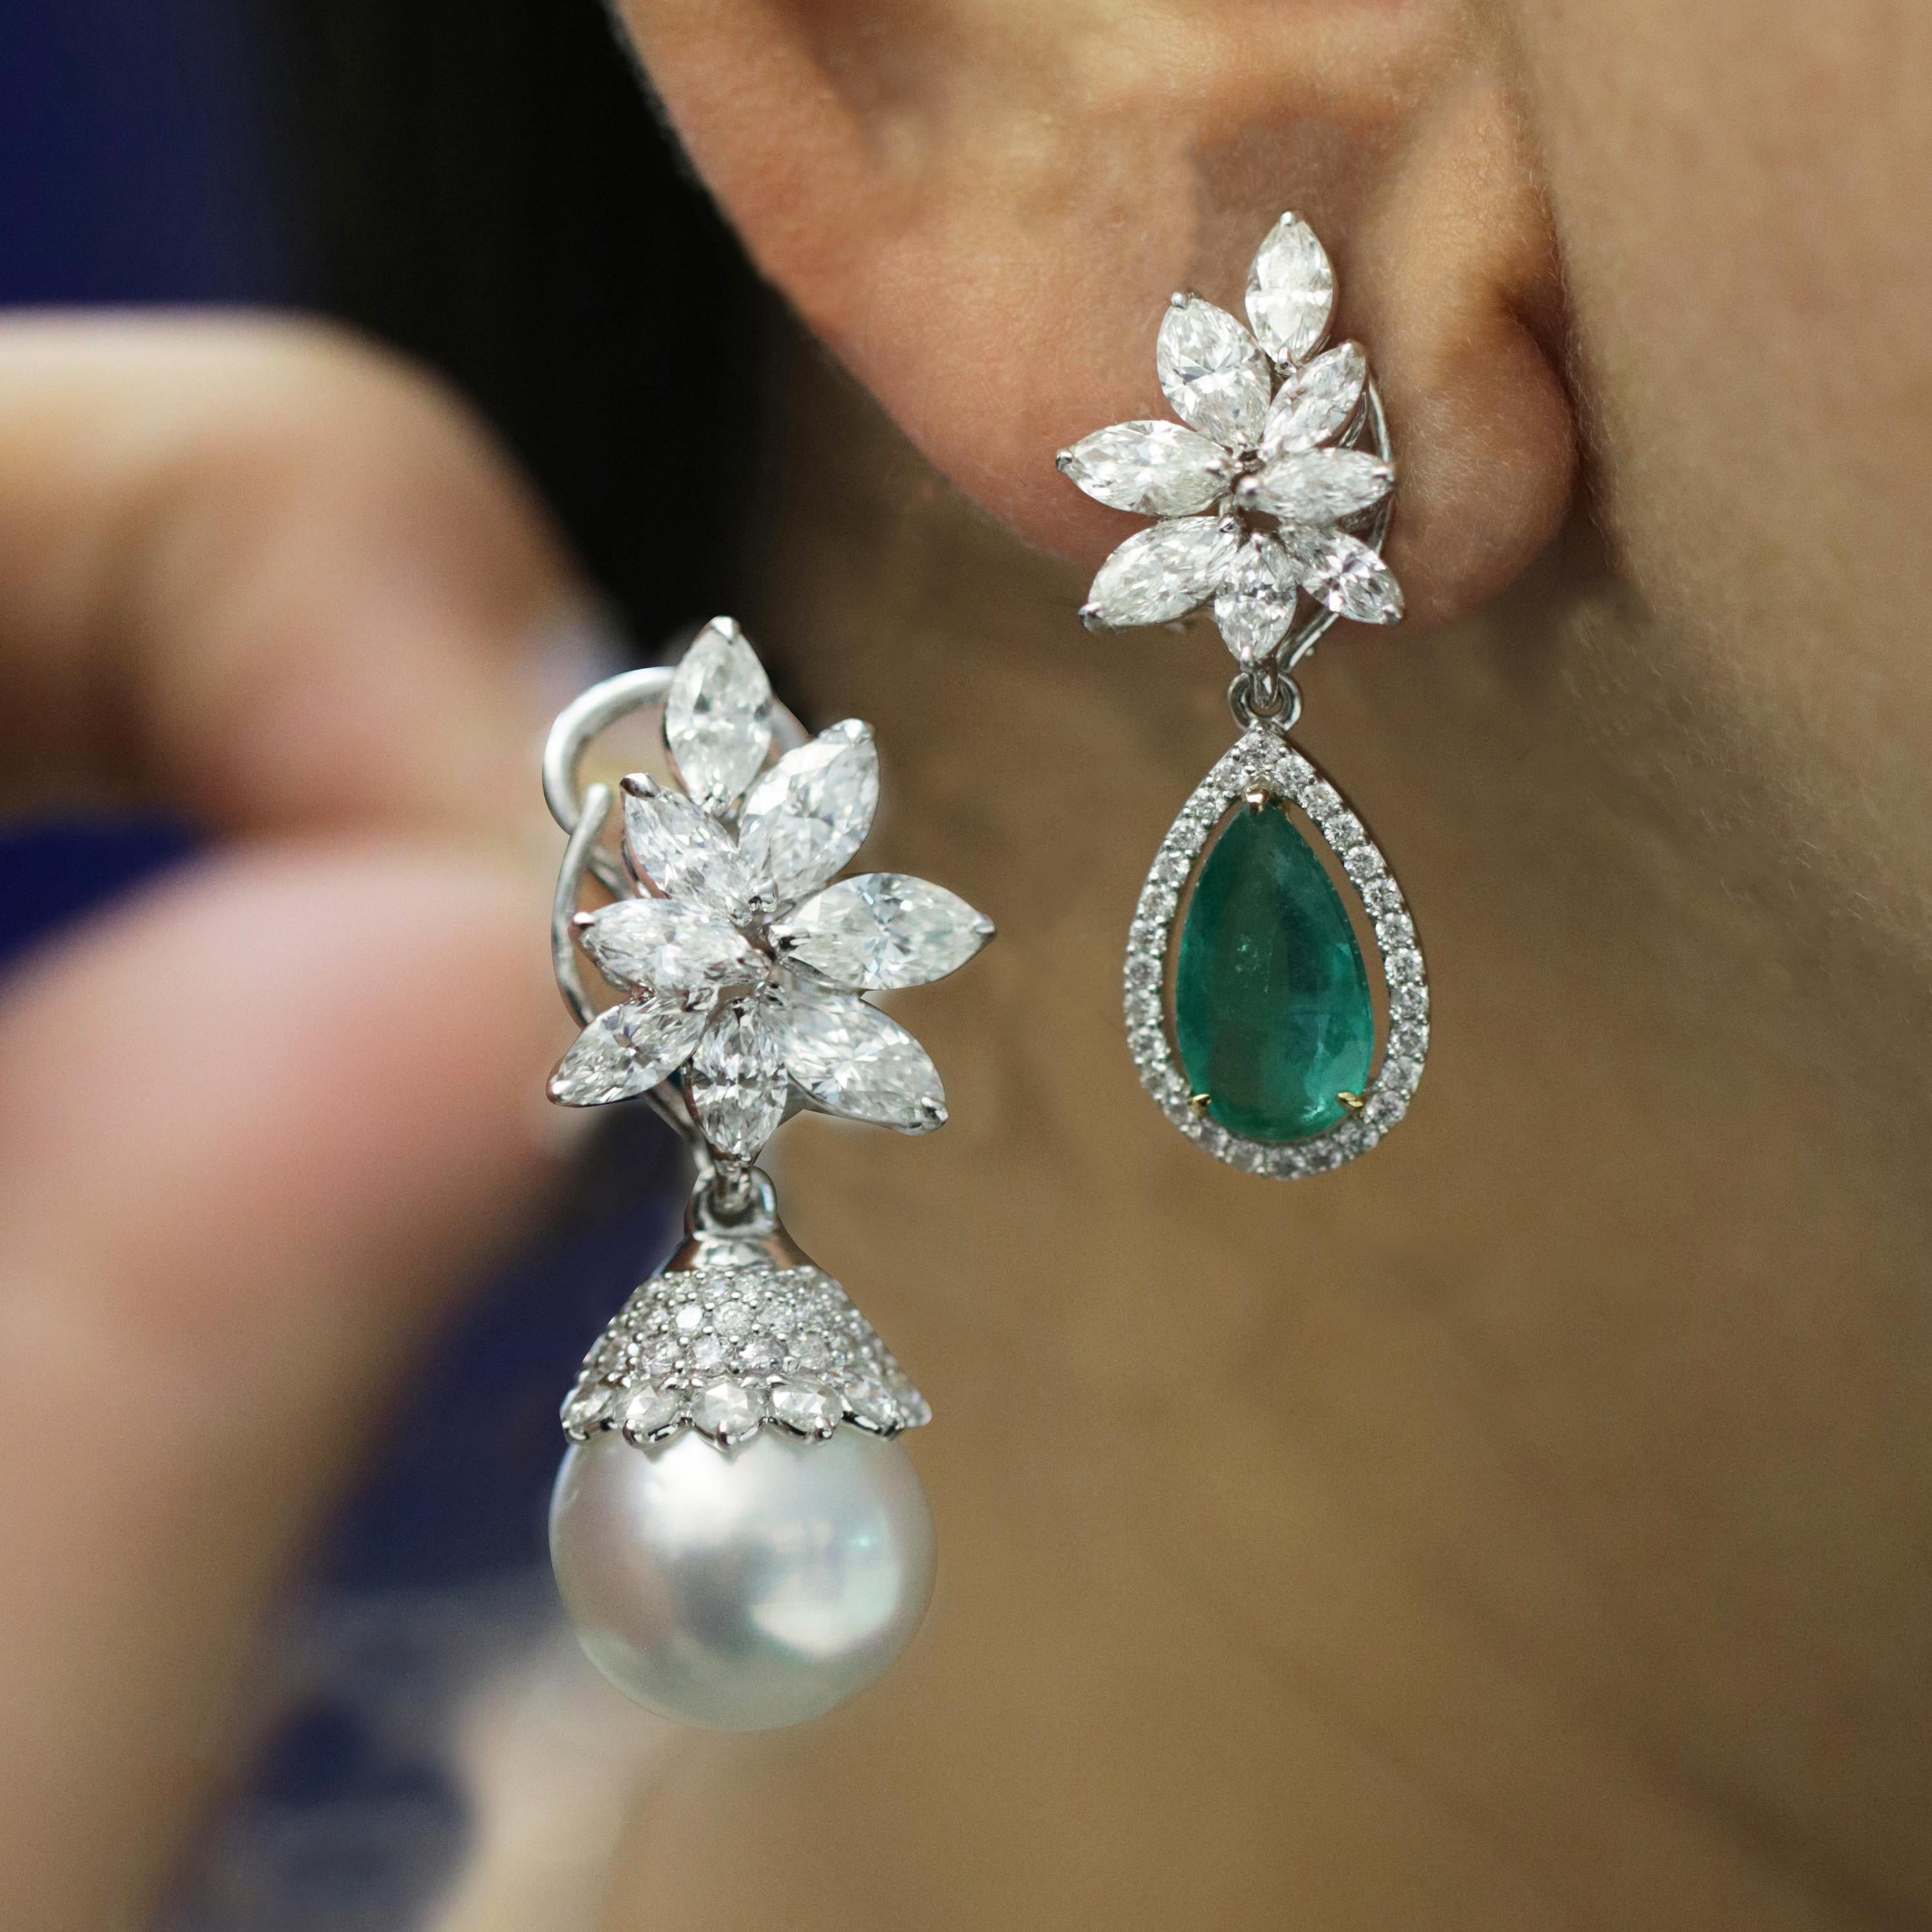 Women's Diamonds Earrings in 18K Gold with Changeable Drops of Emeralds and Pearls